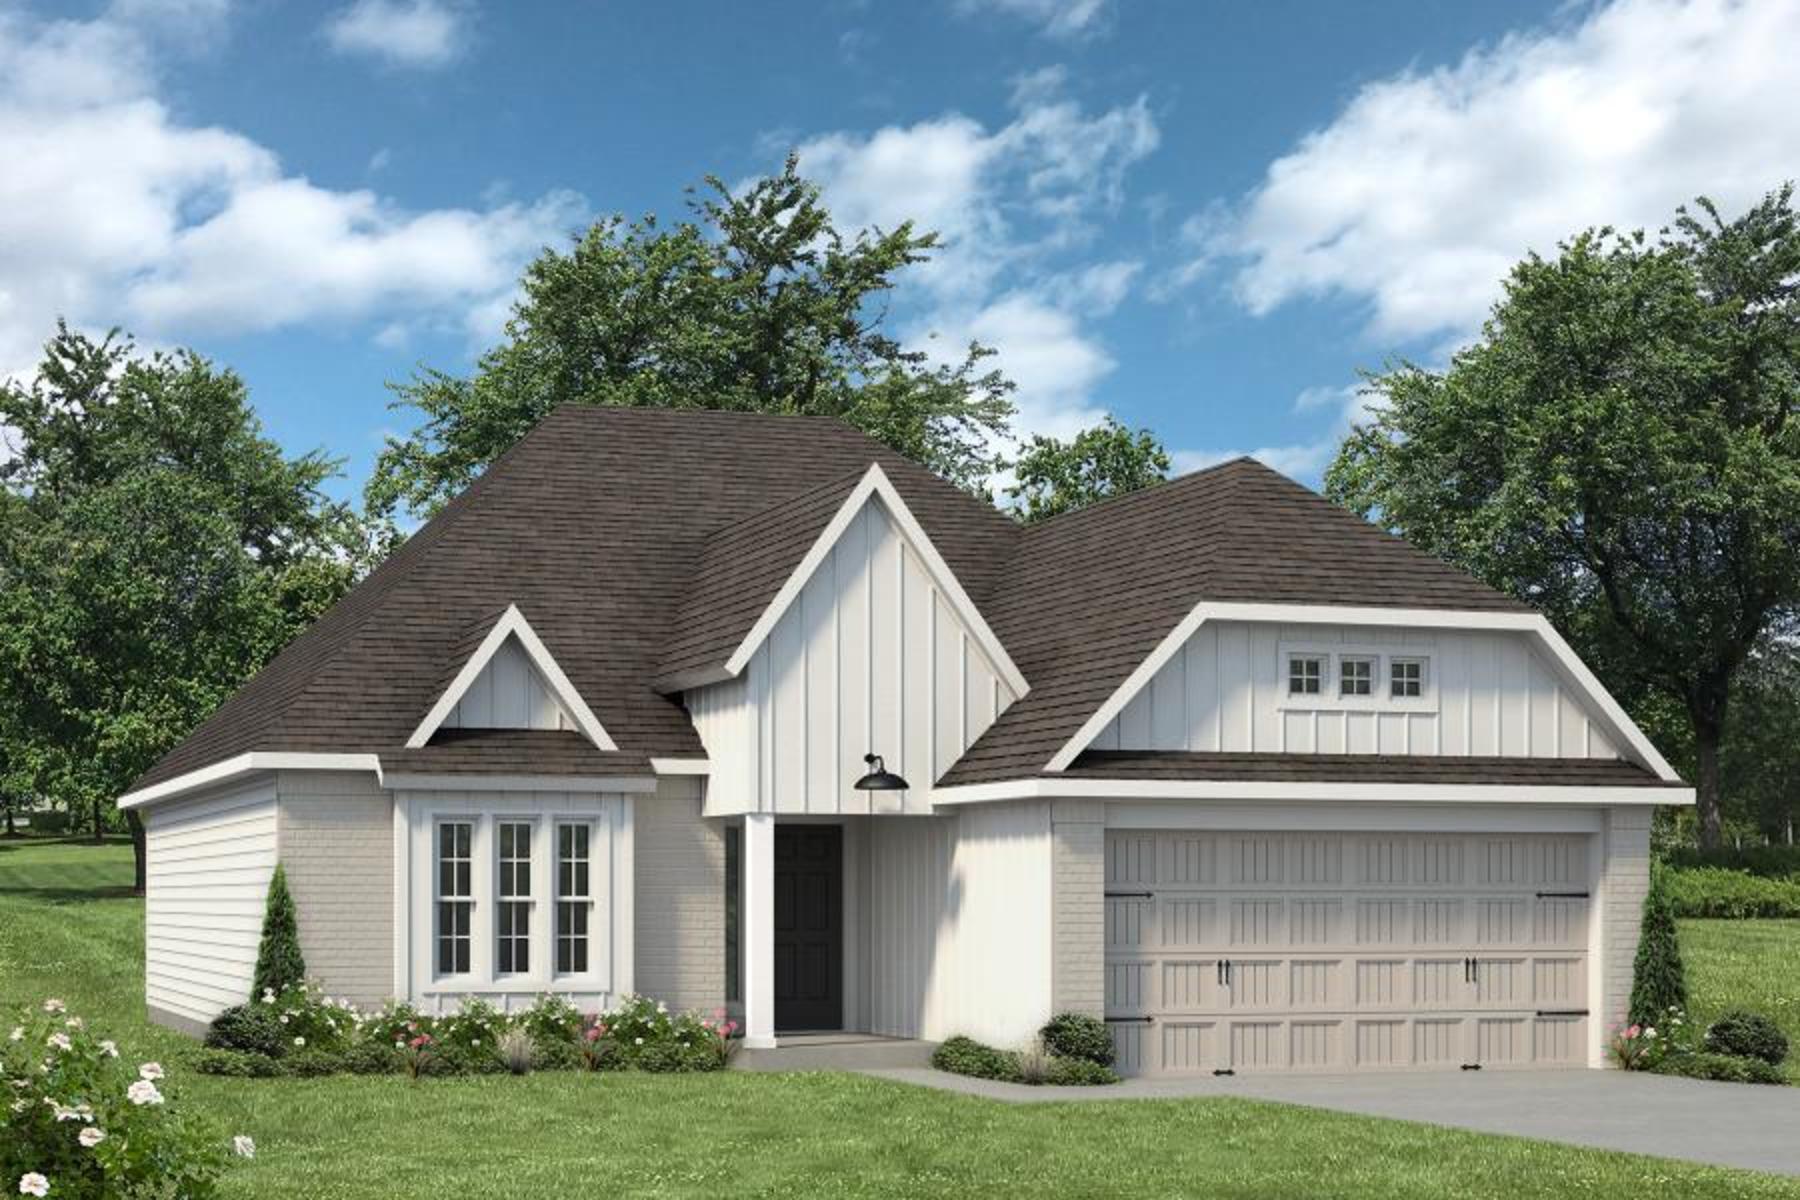 https://myhome.anewgo.com/client/stylecraft/community/Our%20Plans/plan/Blakely?elevId=71. Blakely Home with 3 Bedrooms